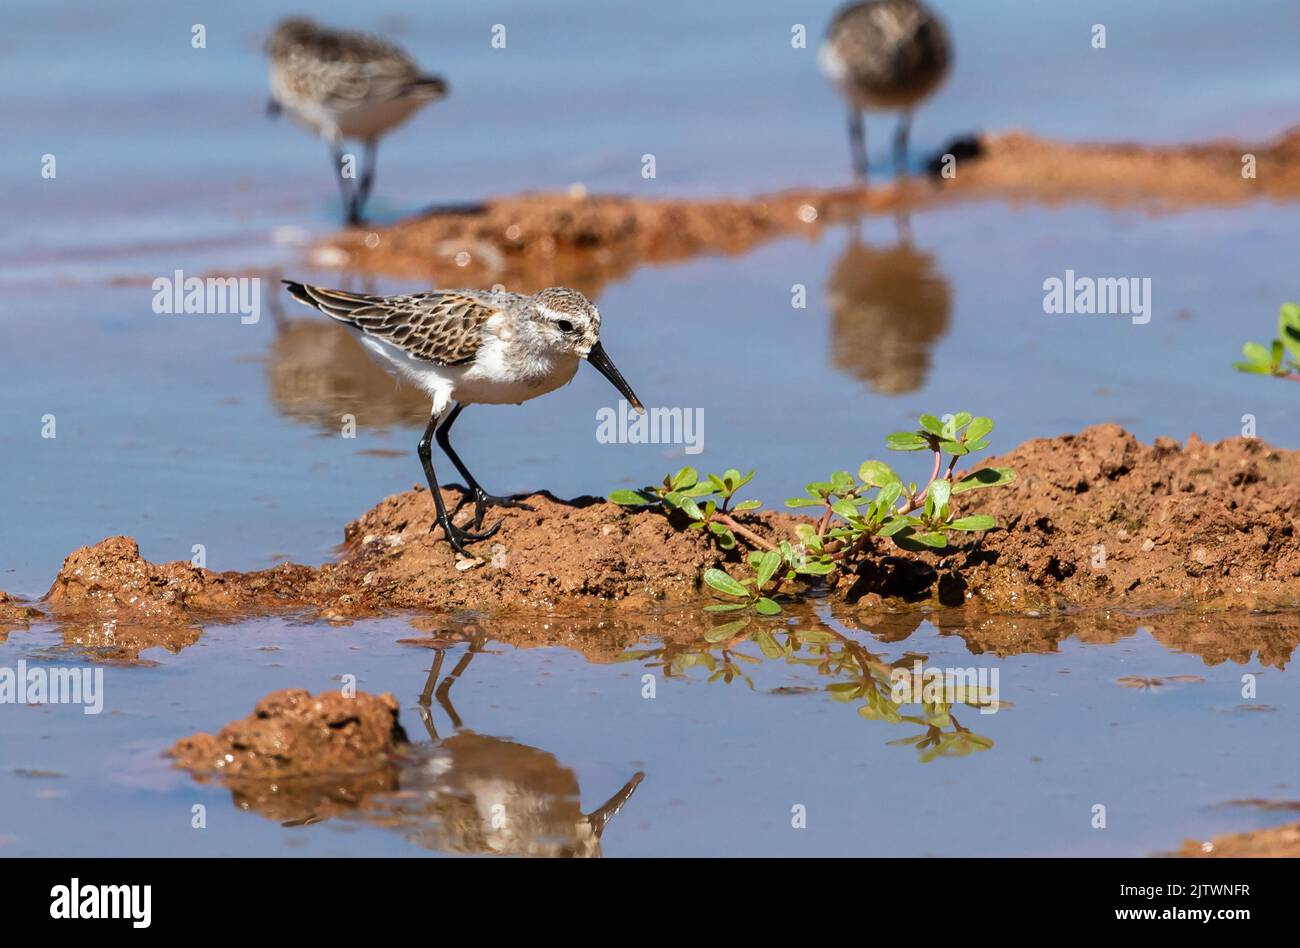 A Western Sandpiper standing on a mound of mud with green vegetation while foraging in Arizona during migration season. Stock Photo